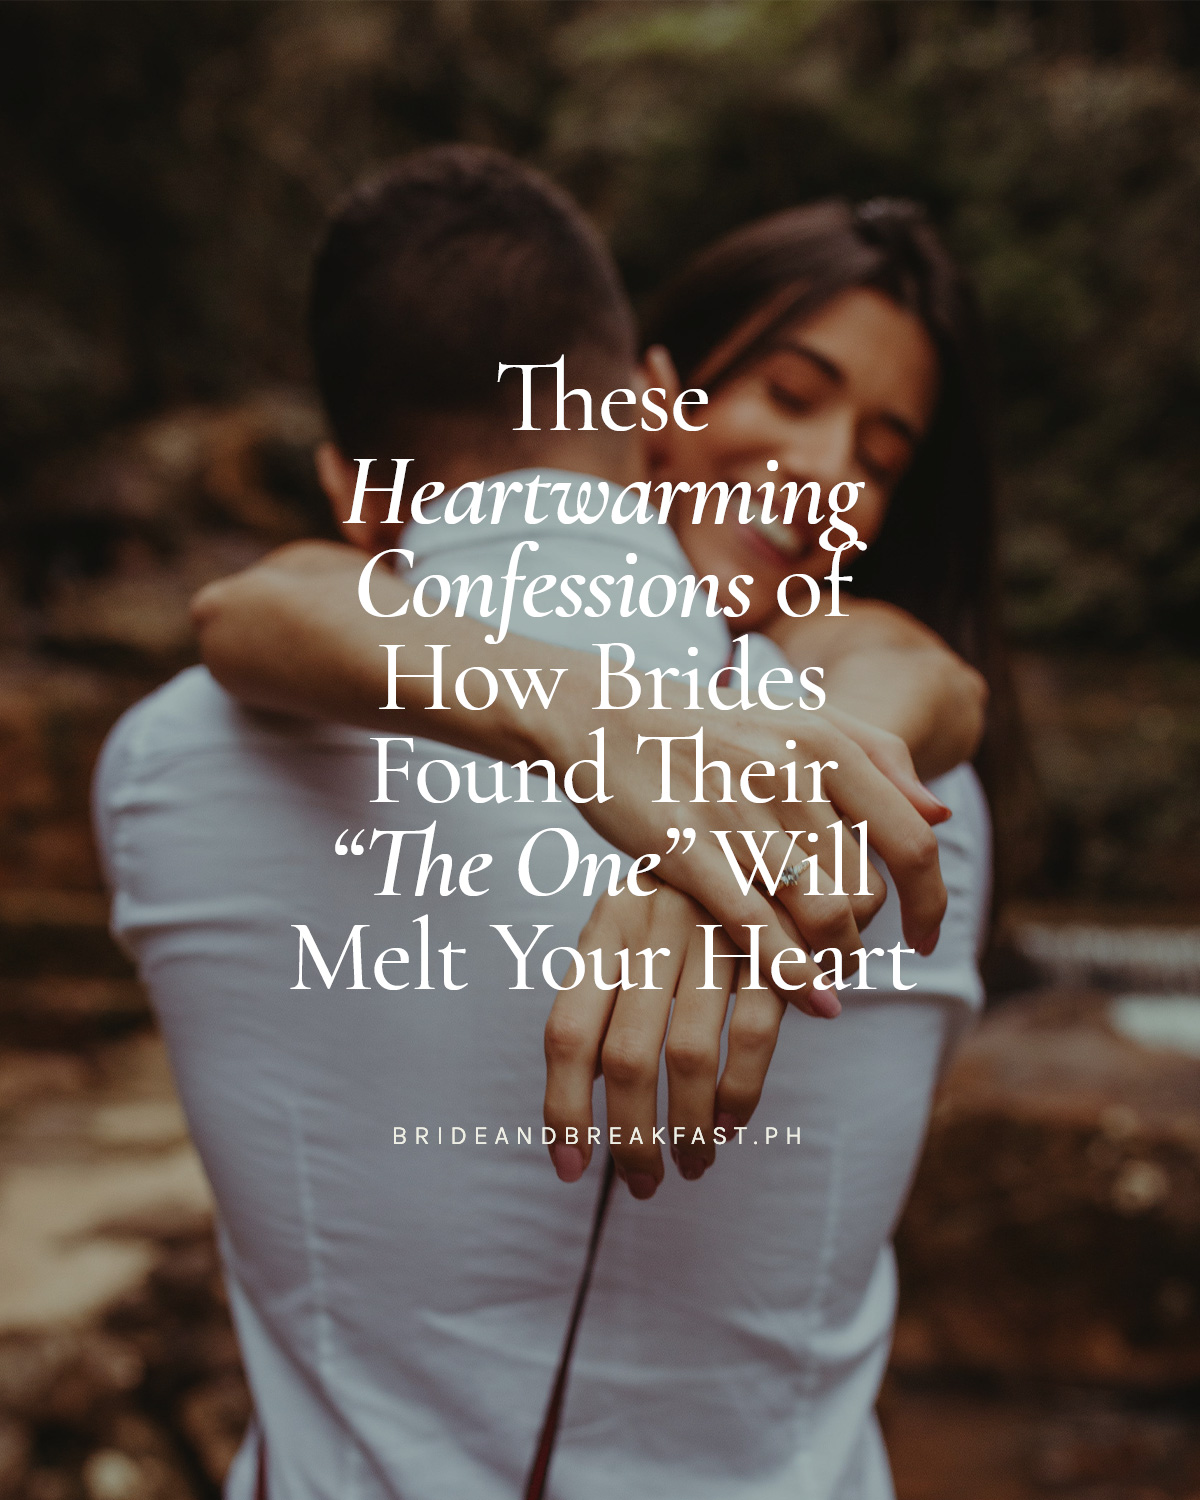 These Heartwarming Confessions of How Brides Found Their "The One" Will Melt Your Heart